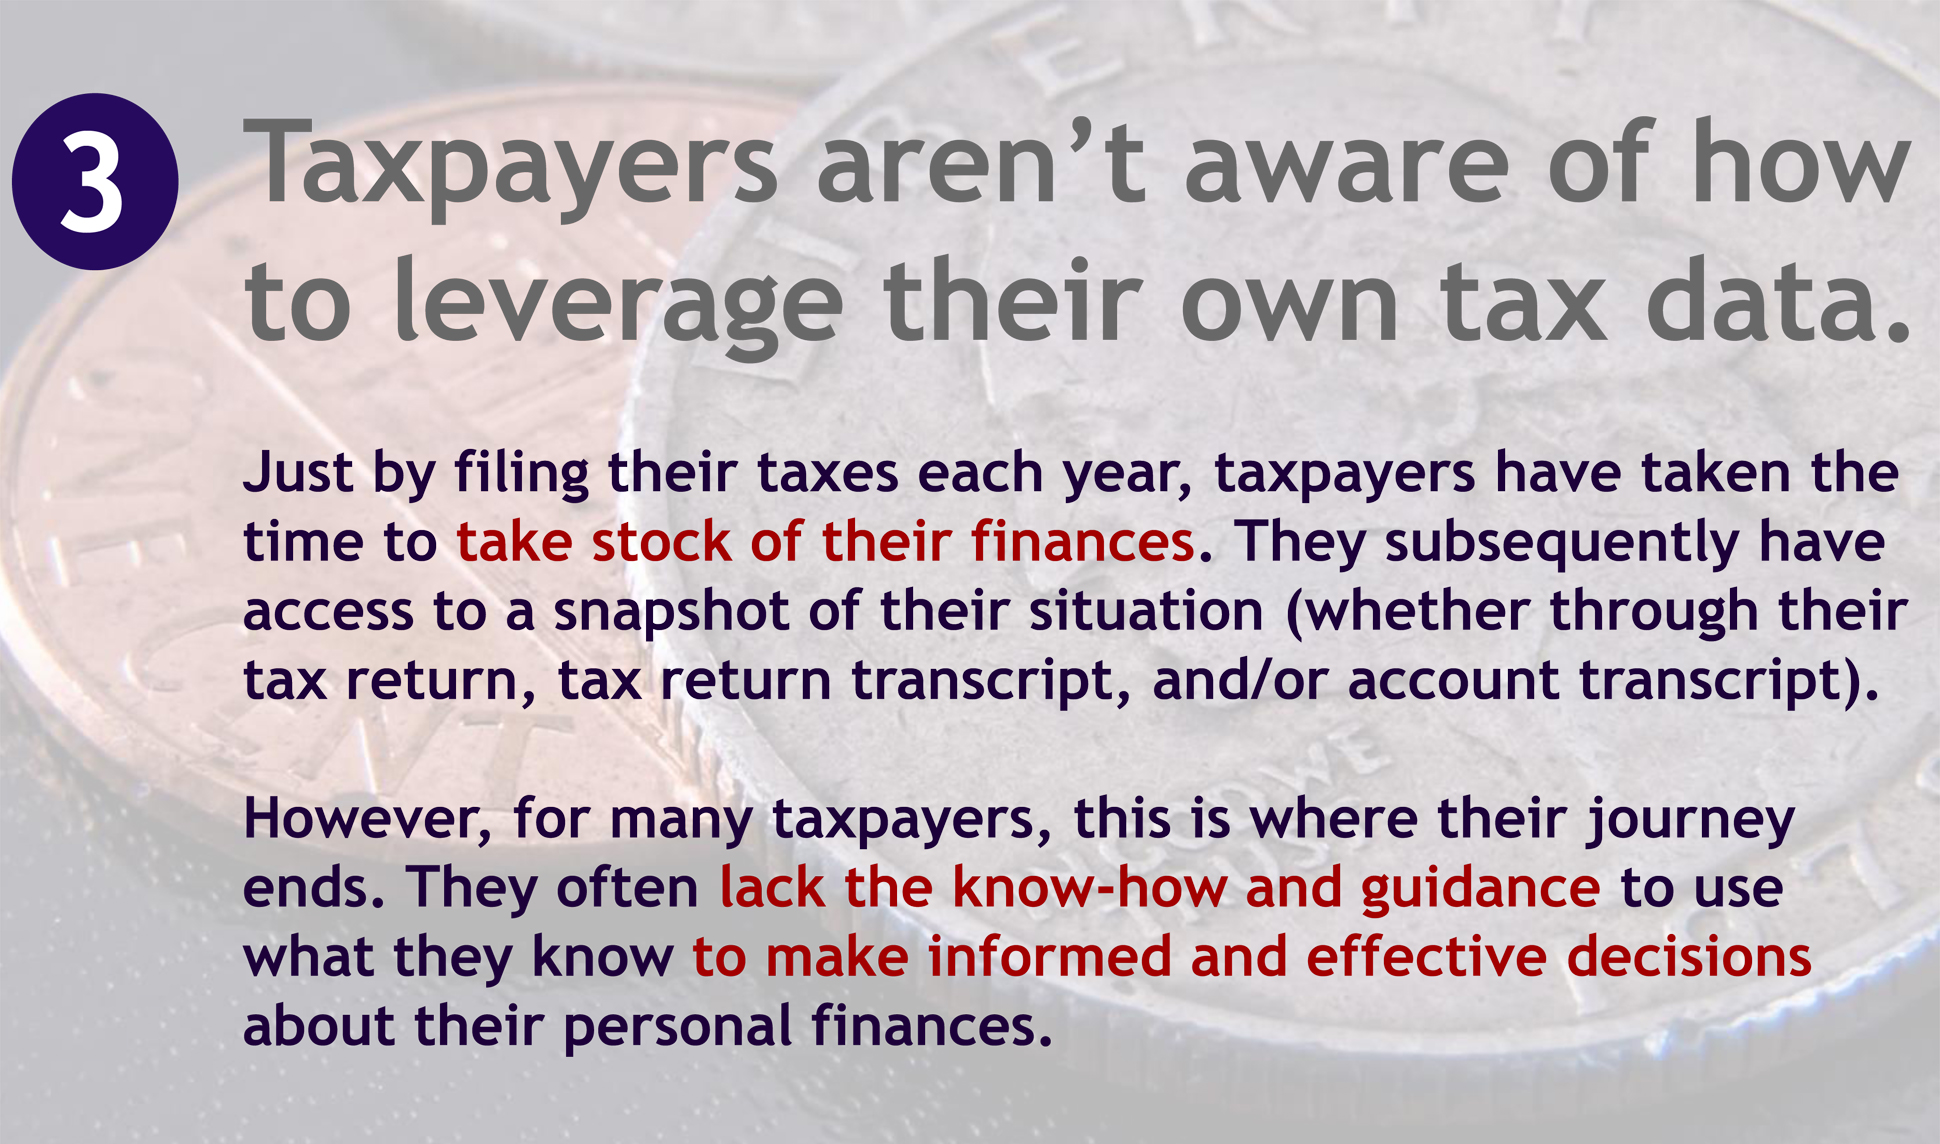 A page from a tax design challenge submission. A third reason people don’t like the IRS is provided by the submitter: “Taxpayers aren’t aware of how to leverage their own tax data.”